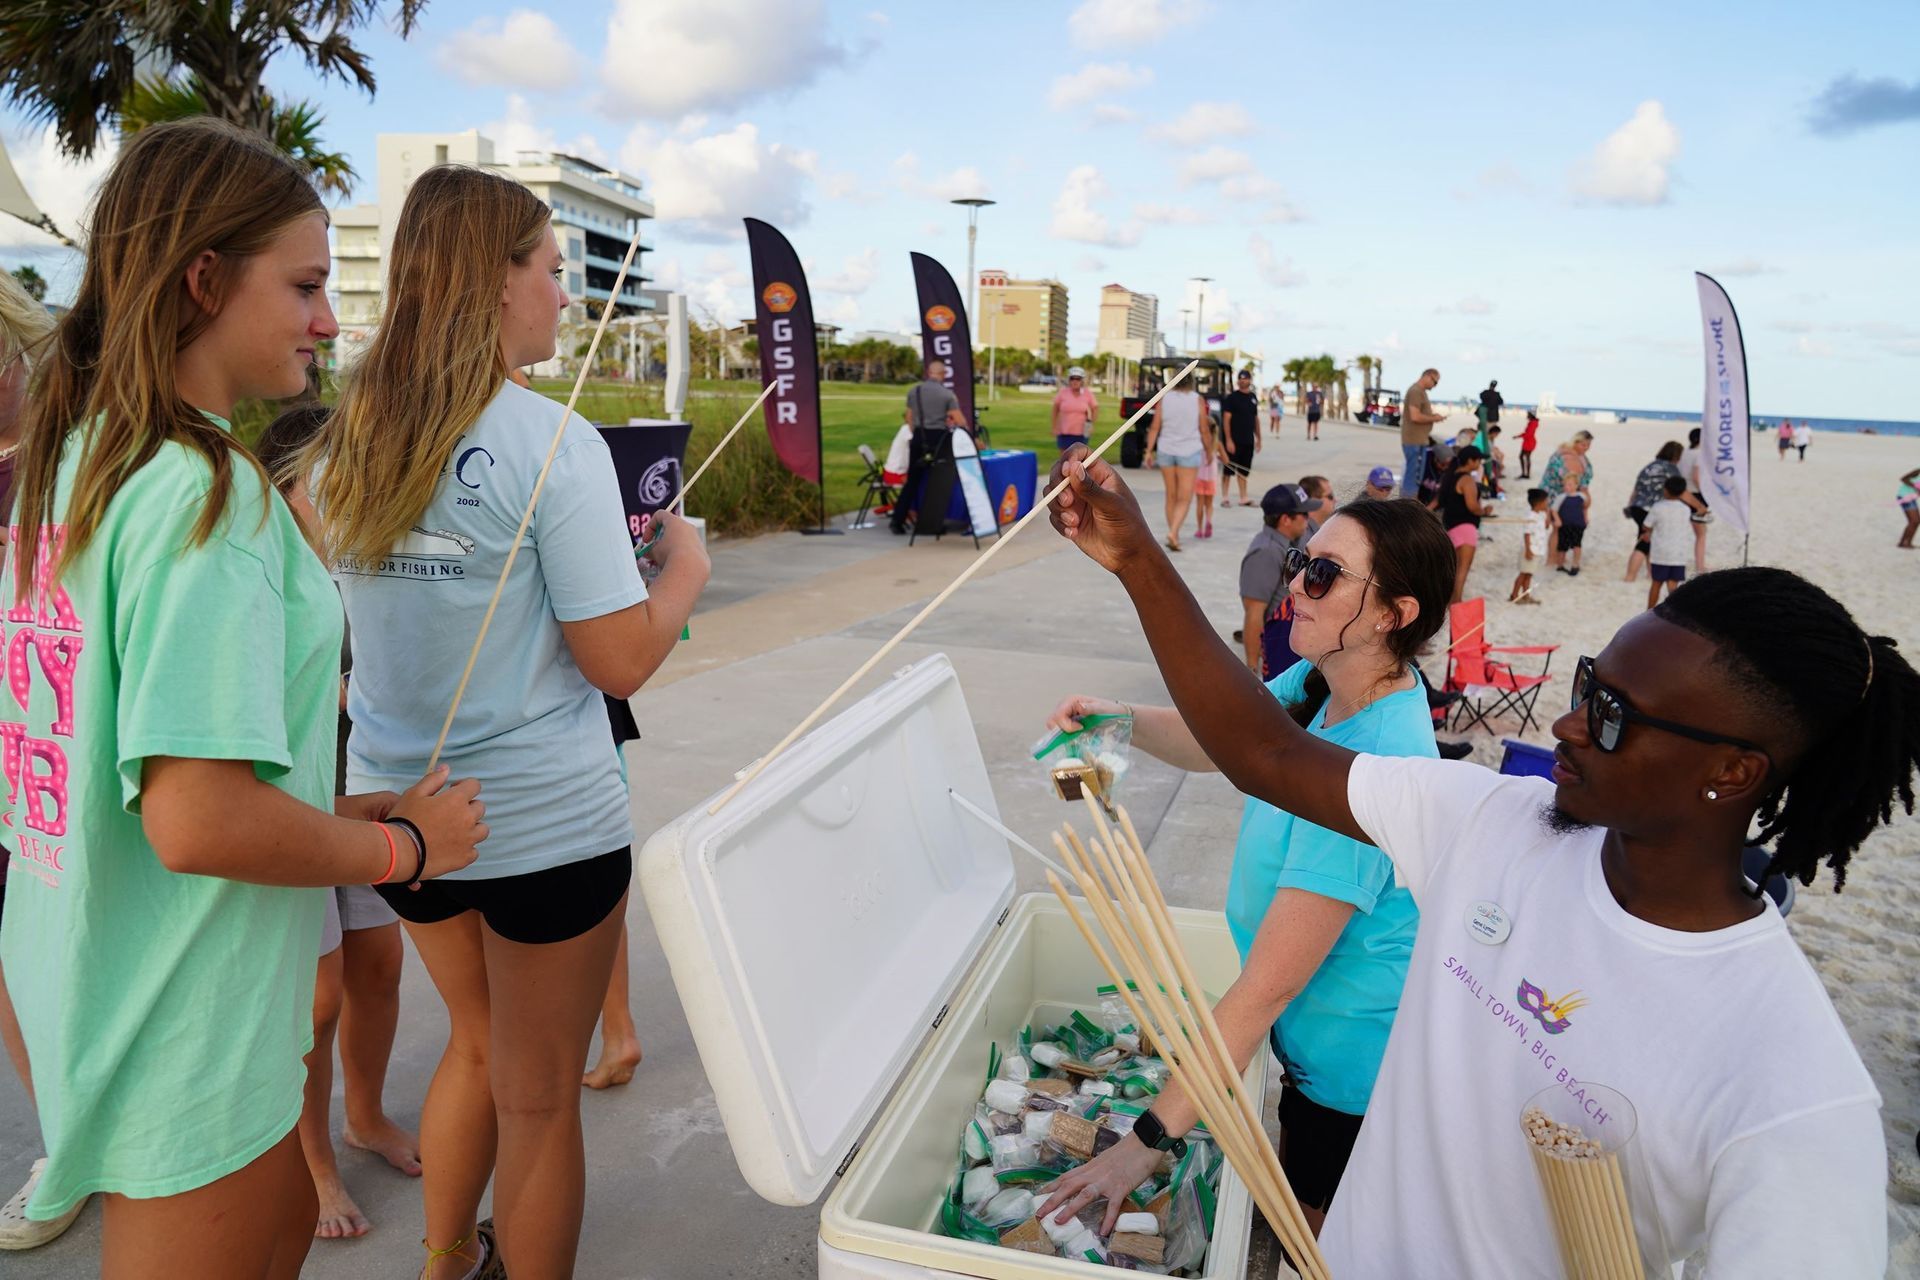 Beachside S'mores Bash Returns to Gulf Shores May 23rd